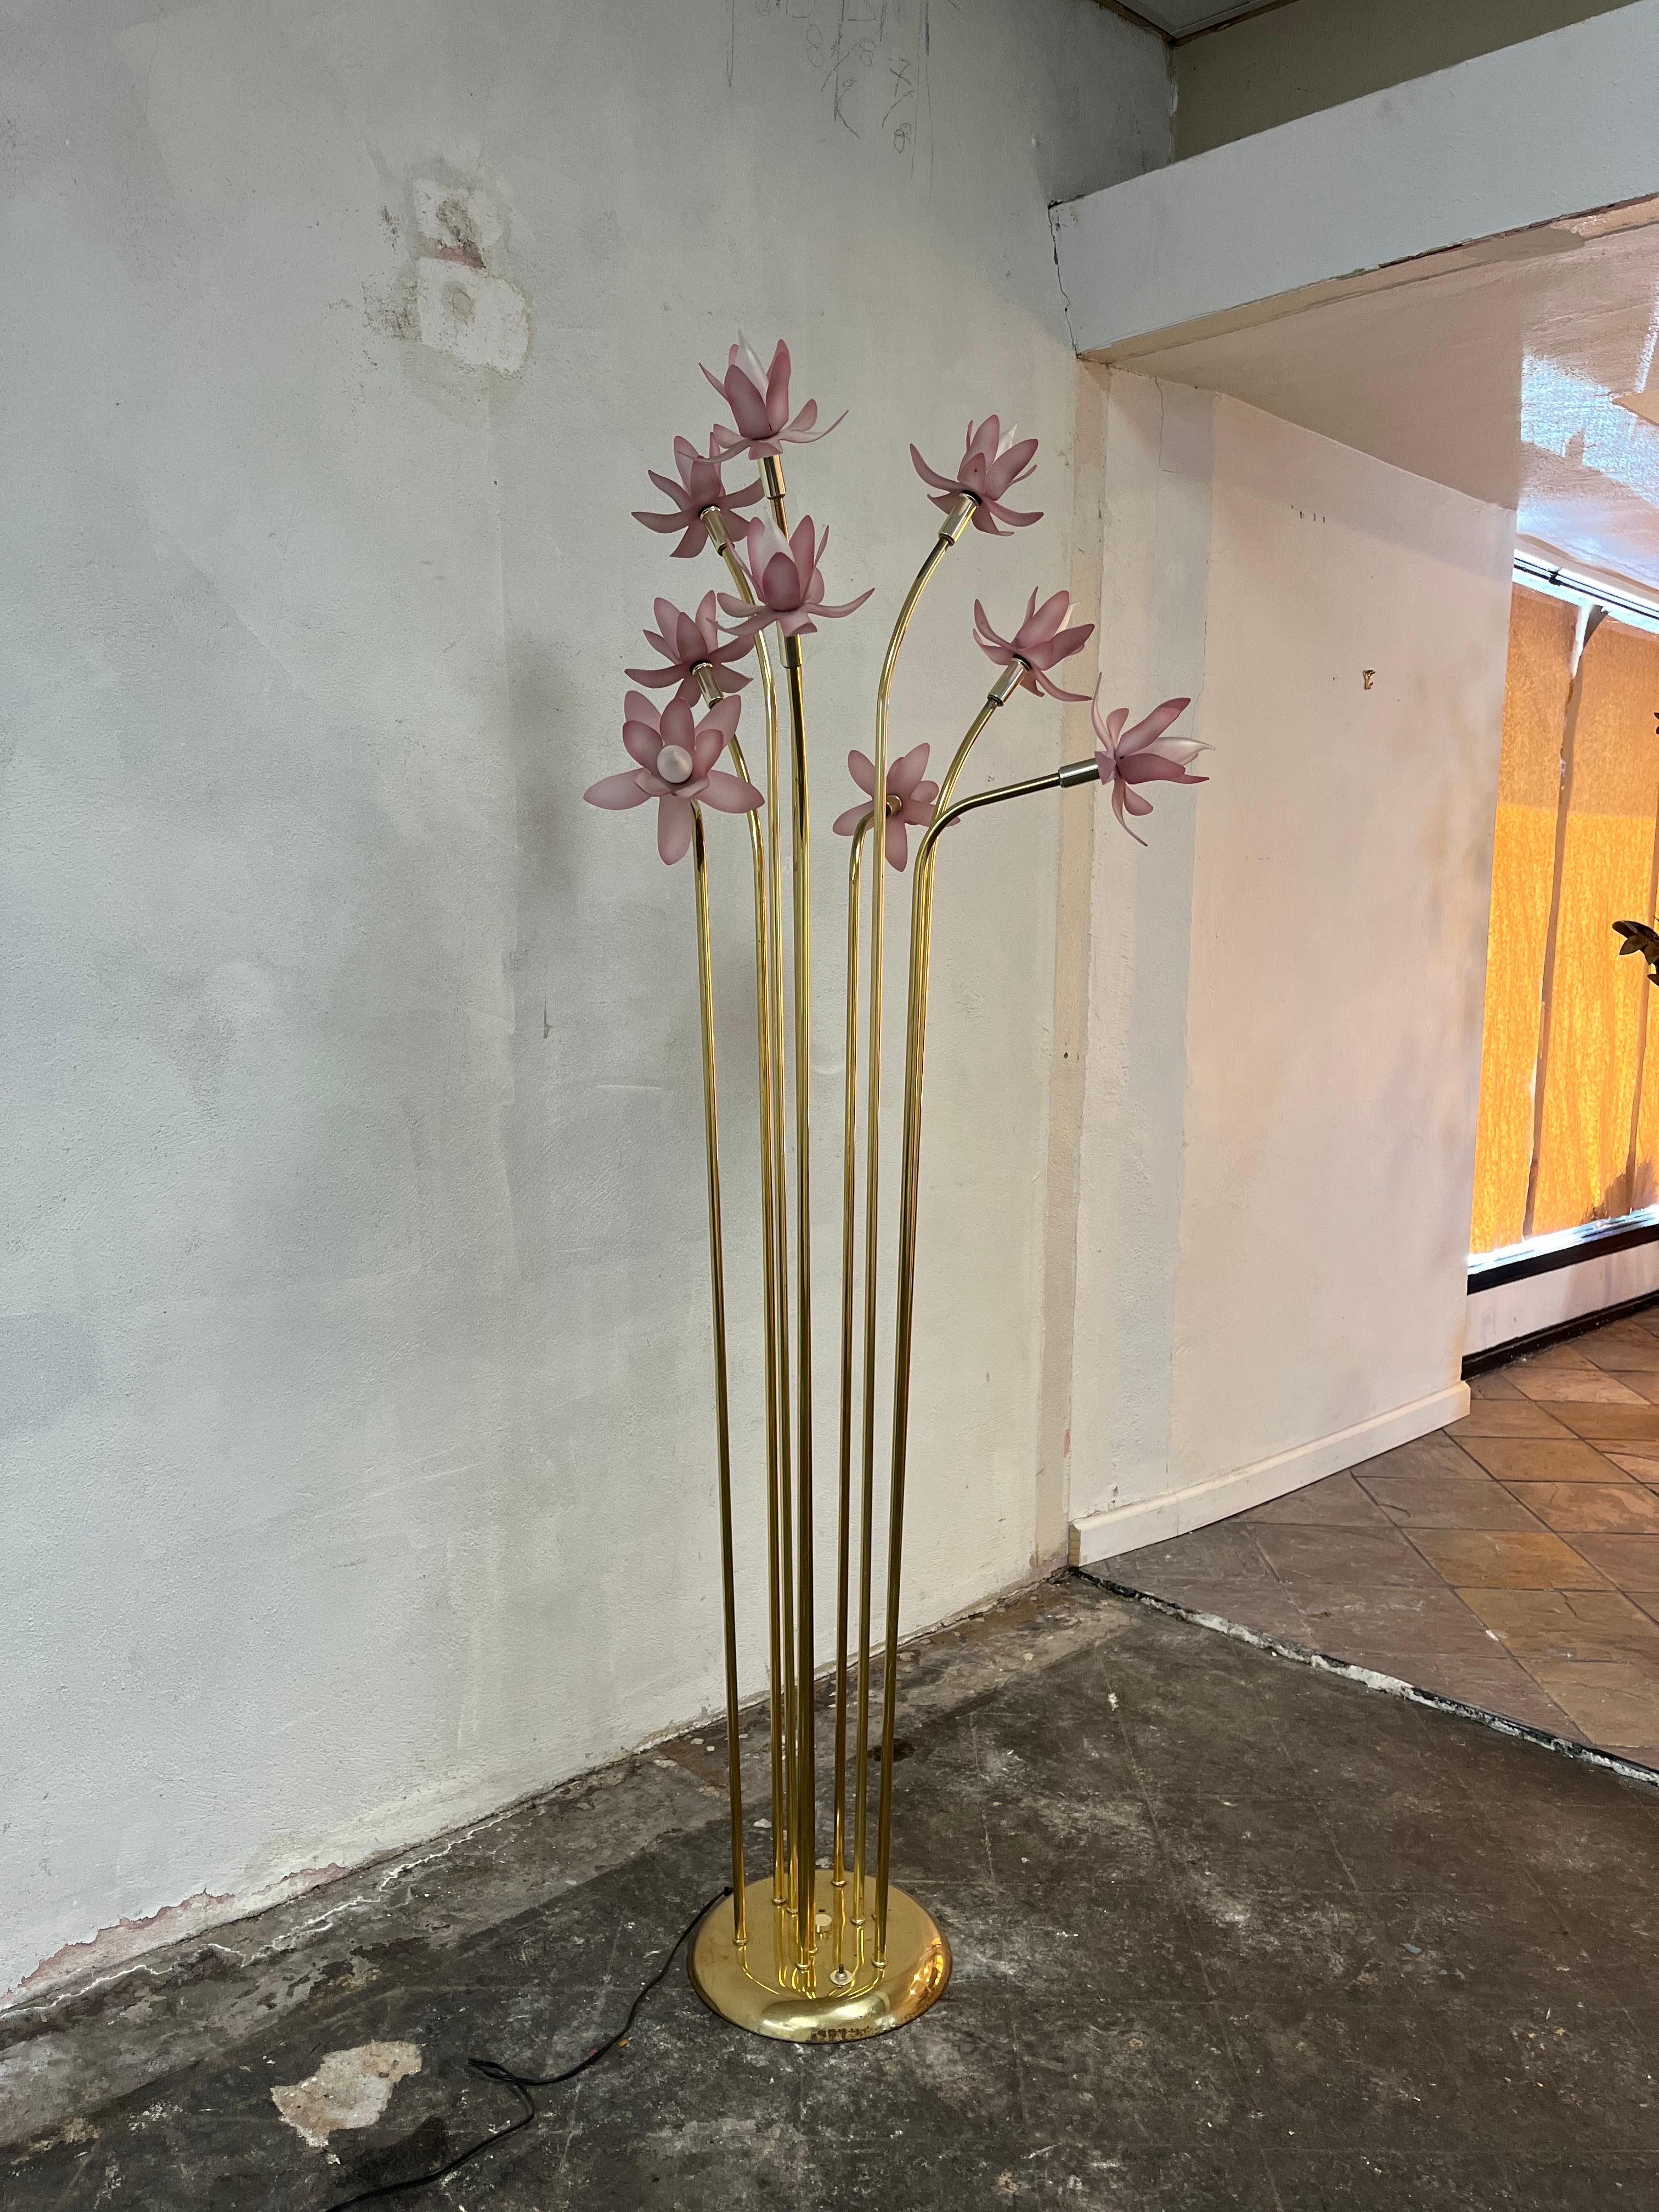 Fun and beautiful 9 light floor lamp with frosted acrylic flower shades in the manner of Rougier. 3 way lighting for mood control. Long brass stems offer nice contrast to purplish flowers. 
Curbside to NYC/Philly $300